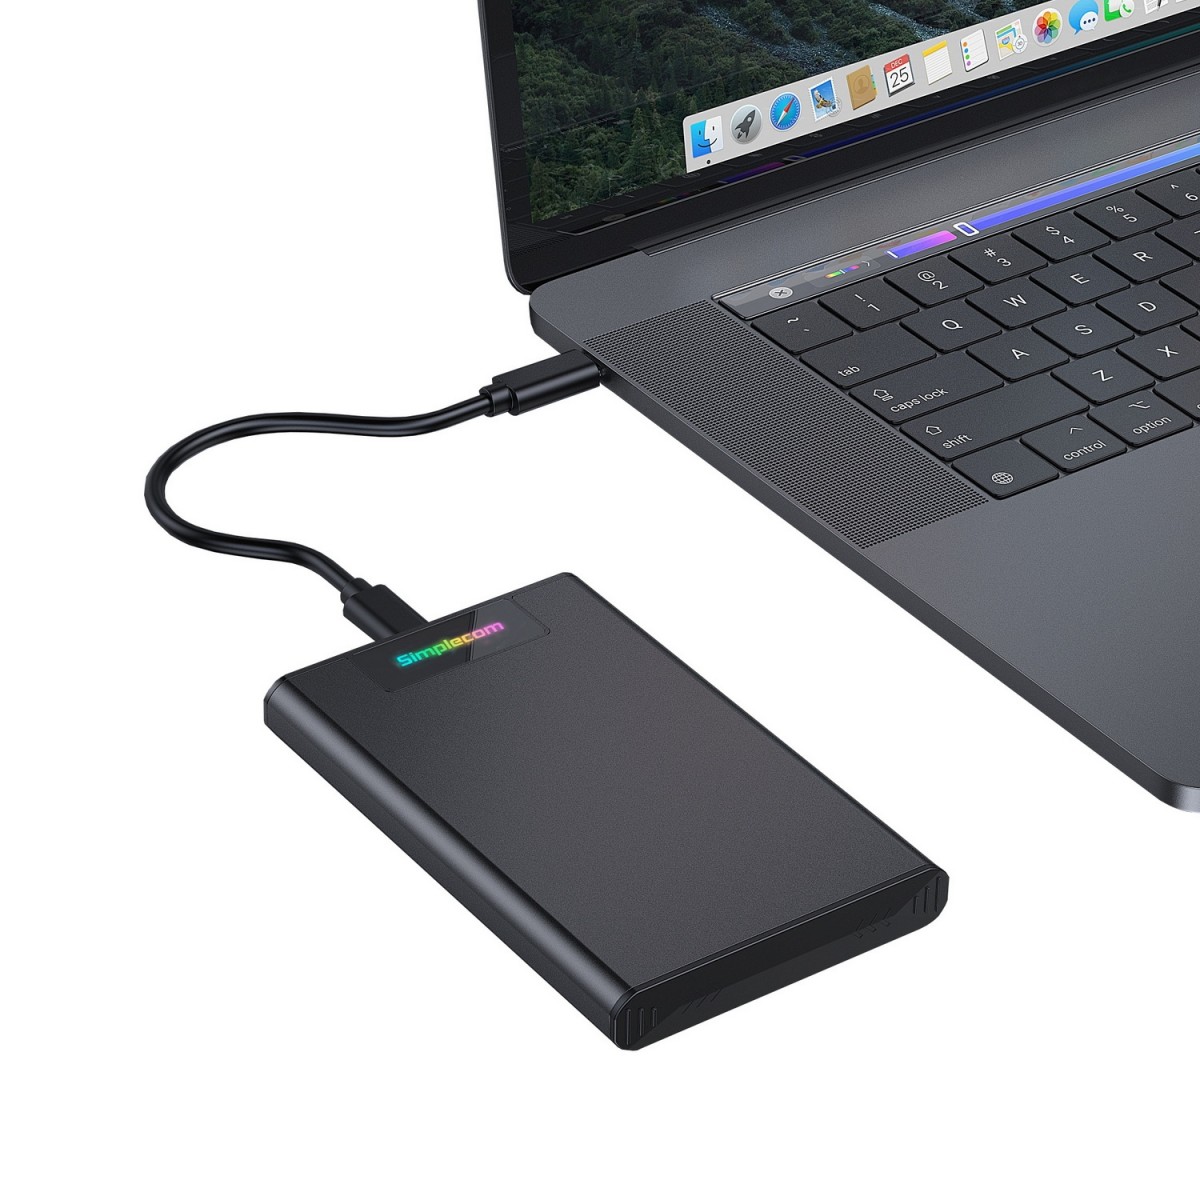 A large marketing image providing additional information about the product Simplecom SE239 Tool-free 2.5" SATA HDD SSD to USB-C Enclosure with RGB Lights USB 3.2 Gen 2 - Additional alt info not provided